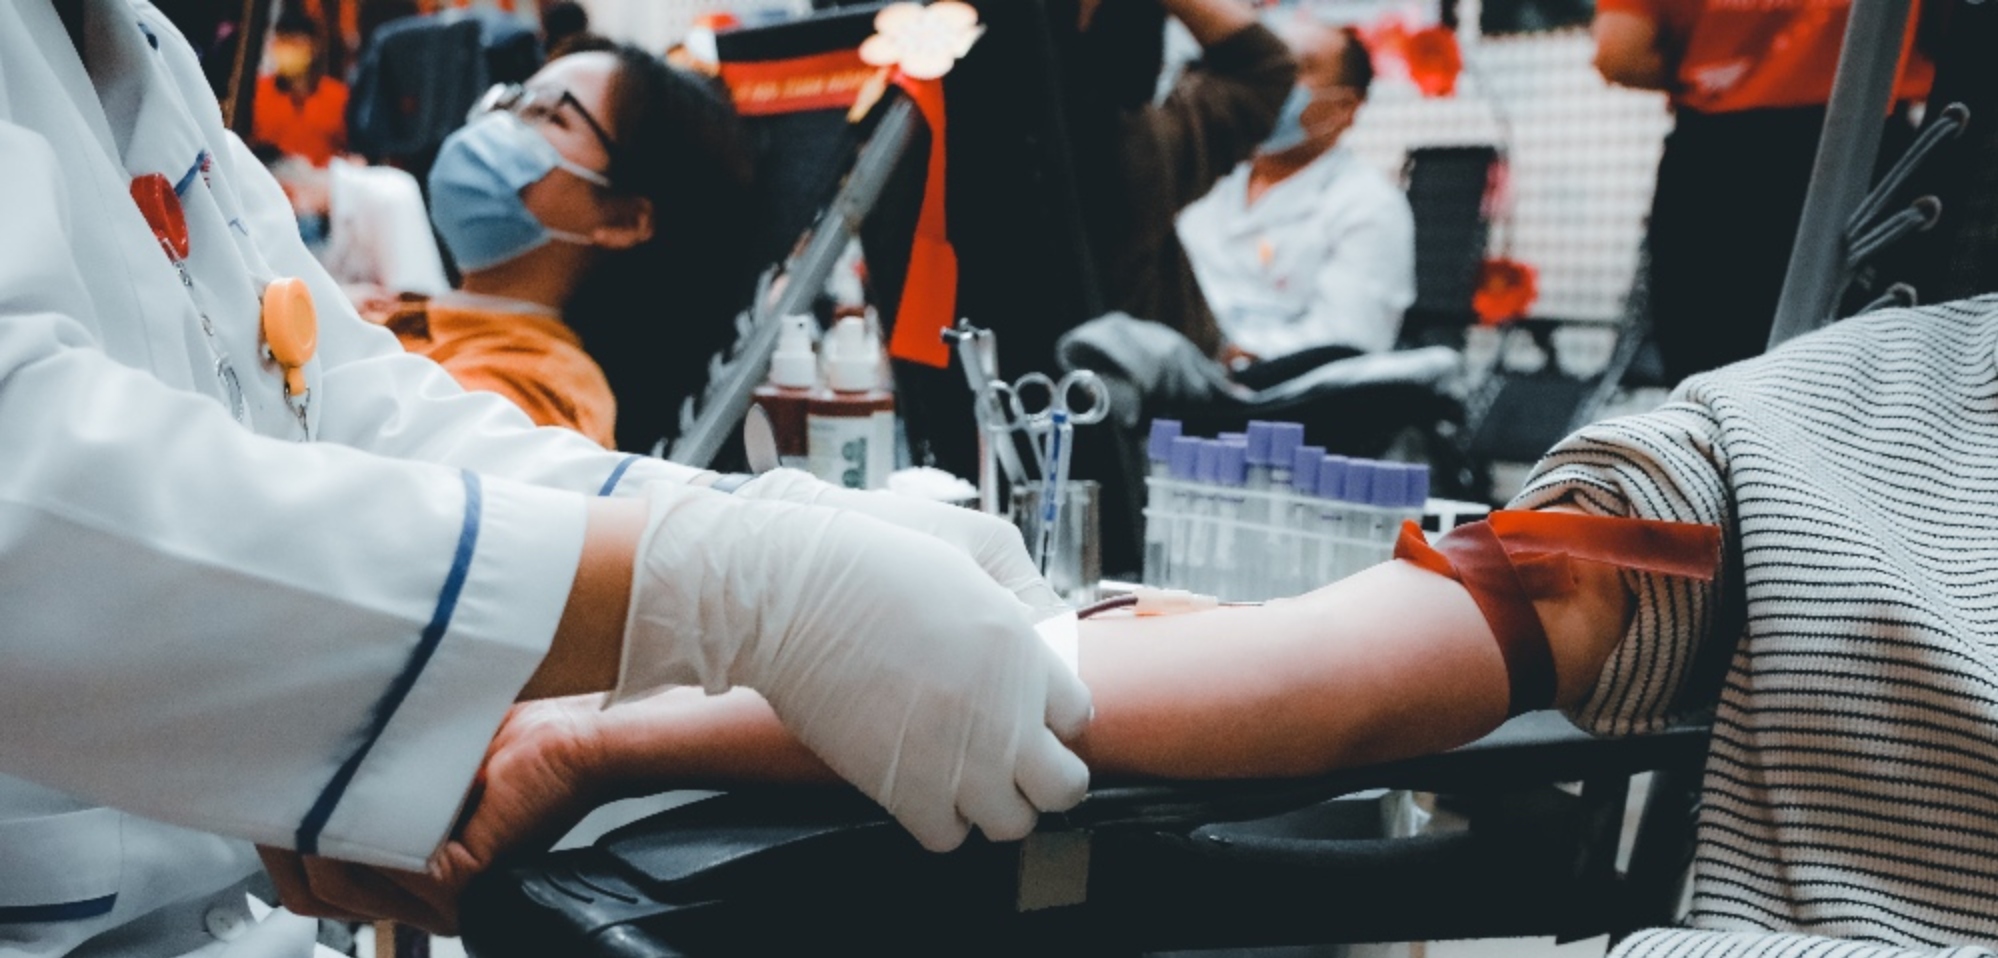 Lifeblood’s Move To Push For Lifting Australia’s Gay Blood Ban Welcomed By Advocates